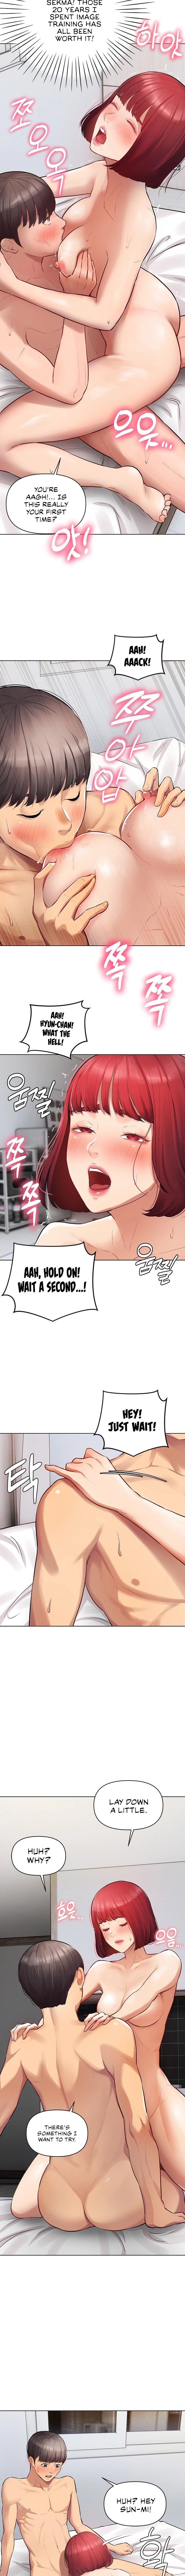 the-girls-i-couldnt-date-before-chap-4-5